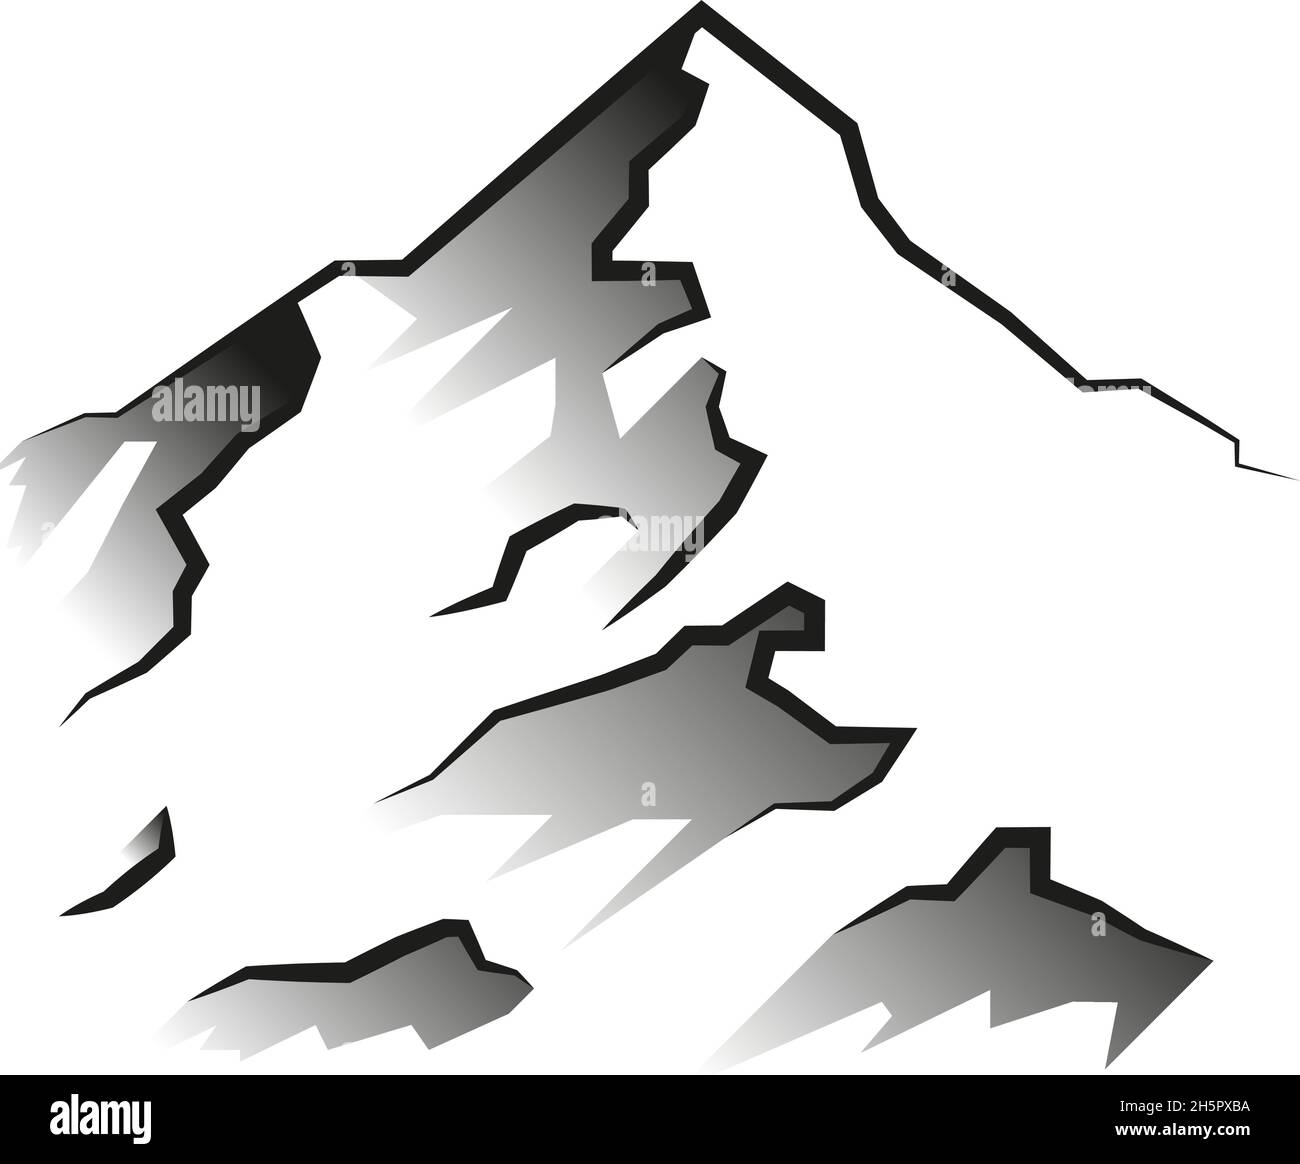 mountain on a white background vector flat illustration Stock Vector